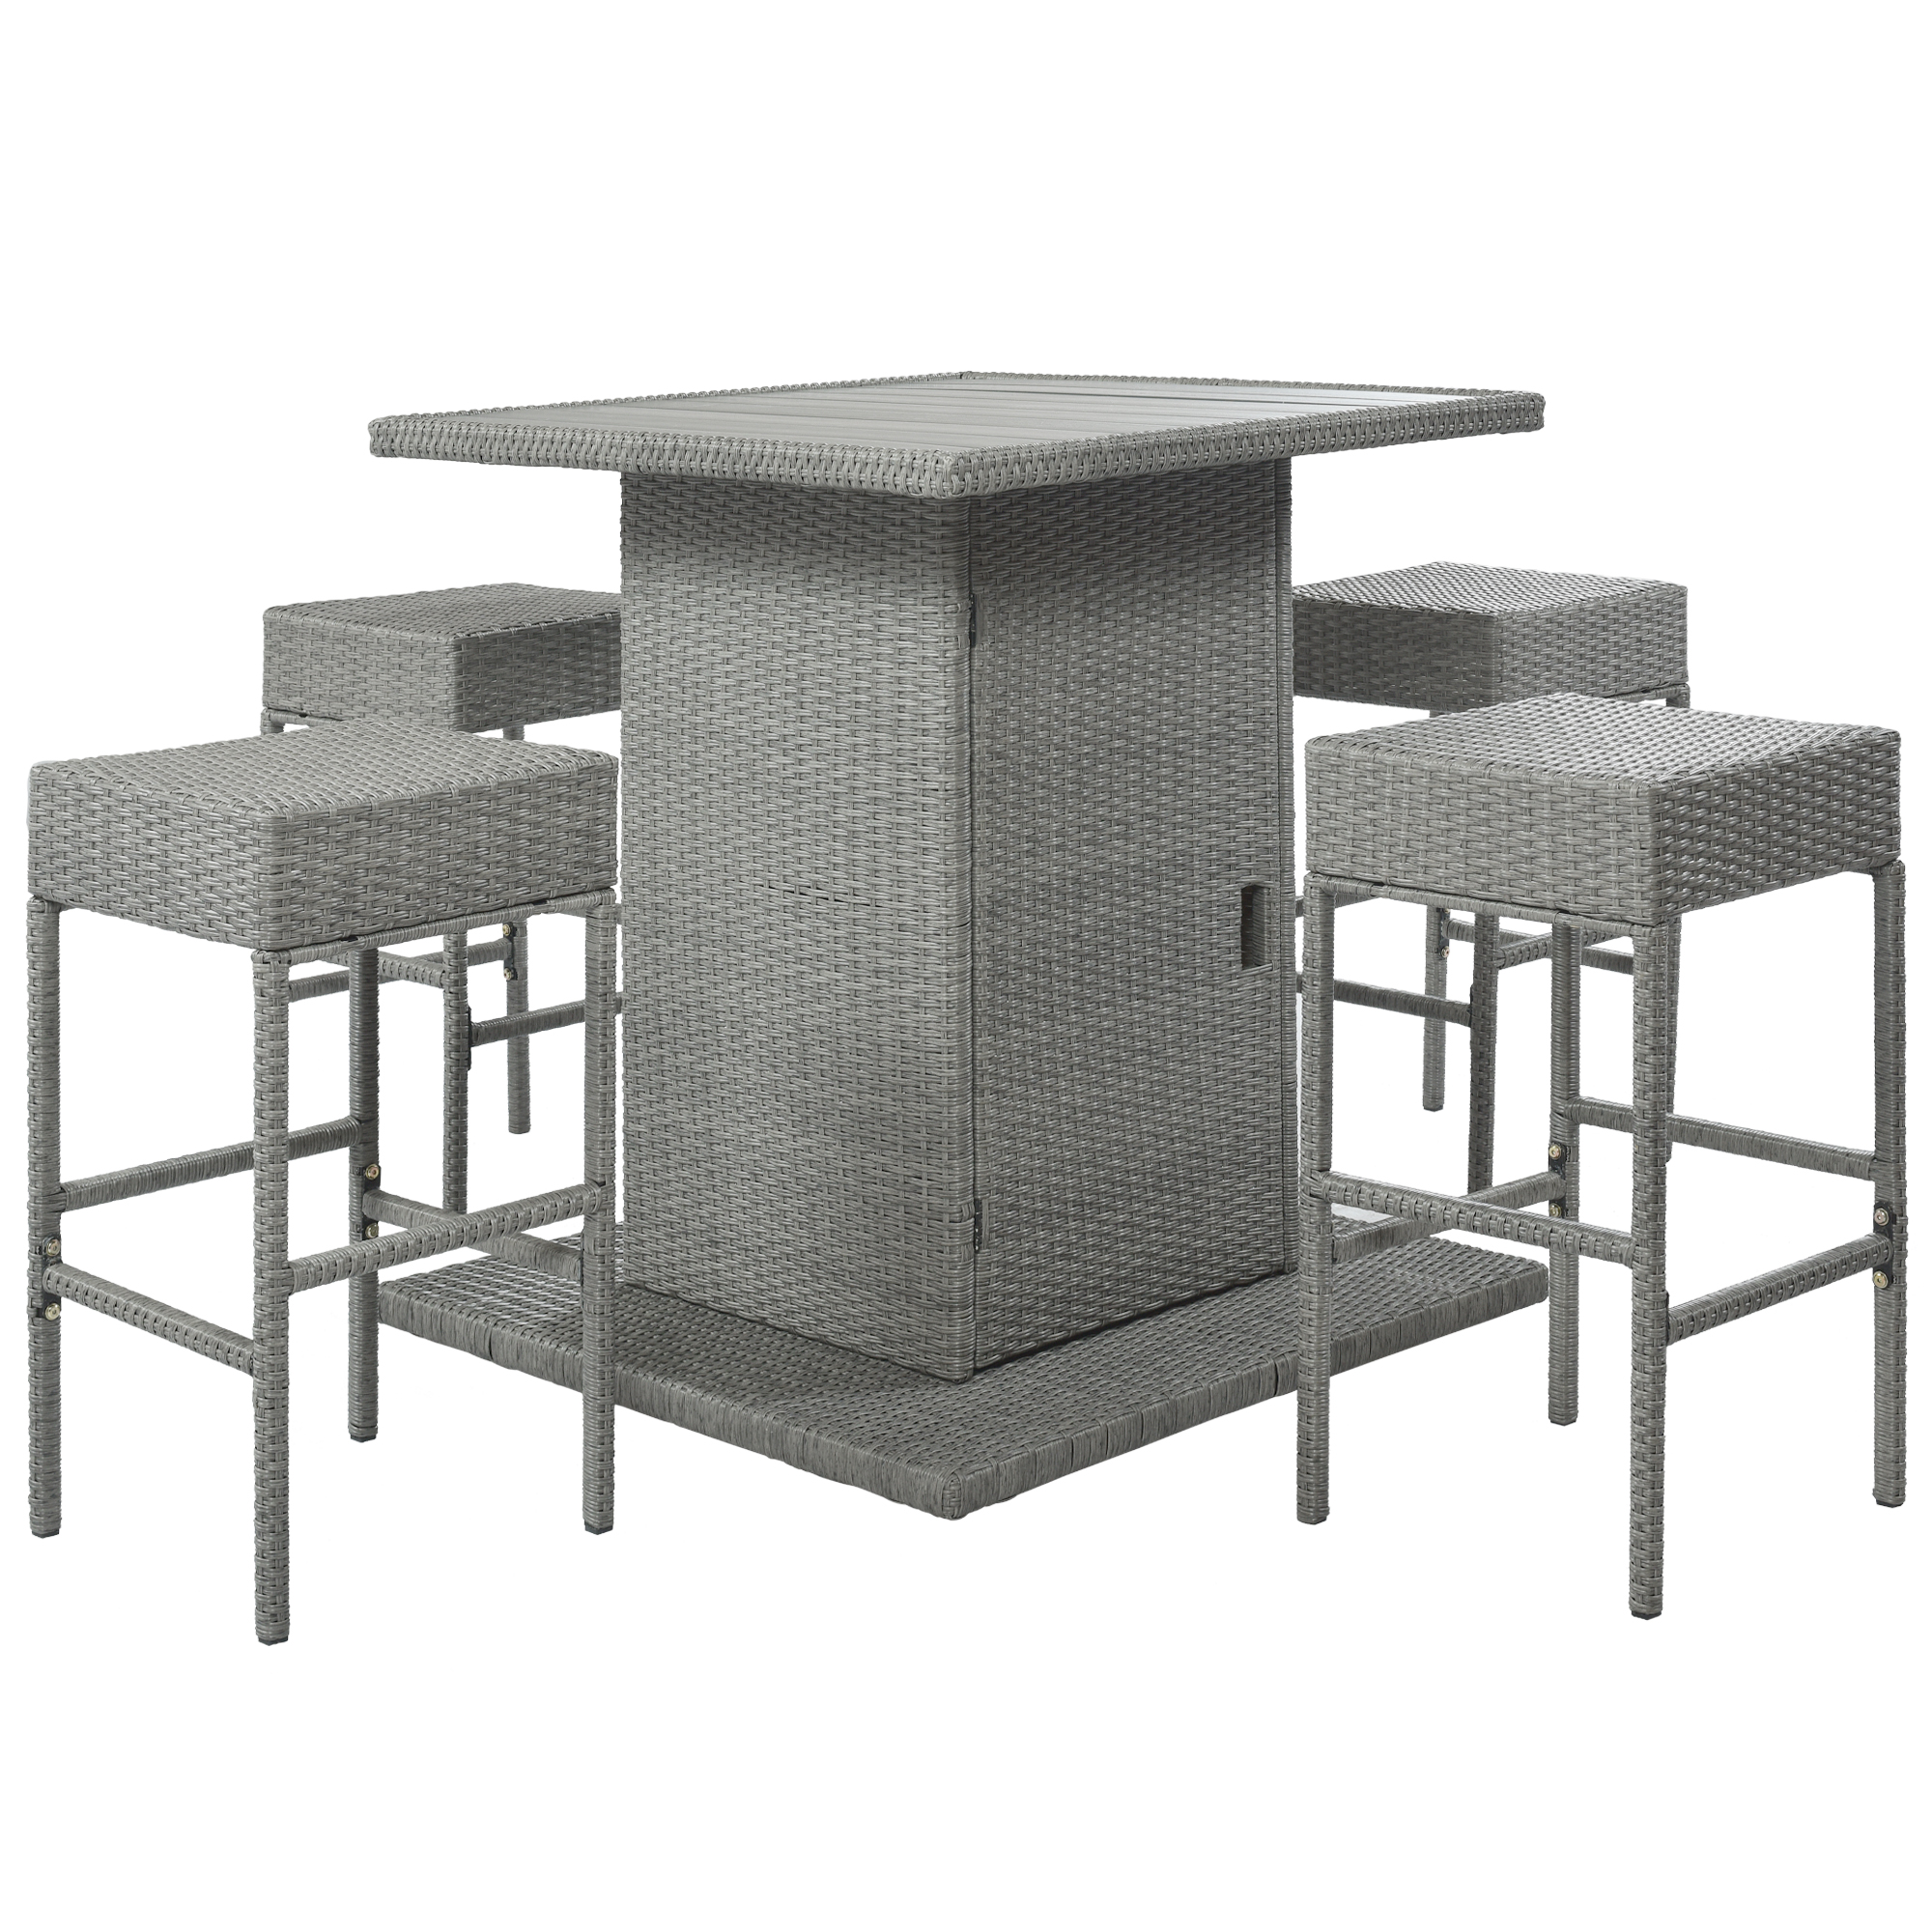 5 Piece Outdoor Patio Height Bar Dining Table Sets, 41'' Hight Outdoor Patio Funiture Table Set with 4 Chairs and Cushions, Kitchen Table with Storage Shelf for Backyard, Poolside, Grey Wicker, S5984 - image 5 of 10